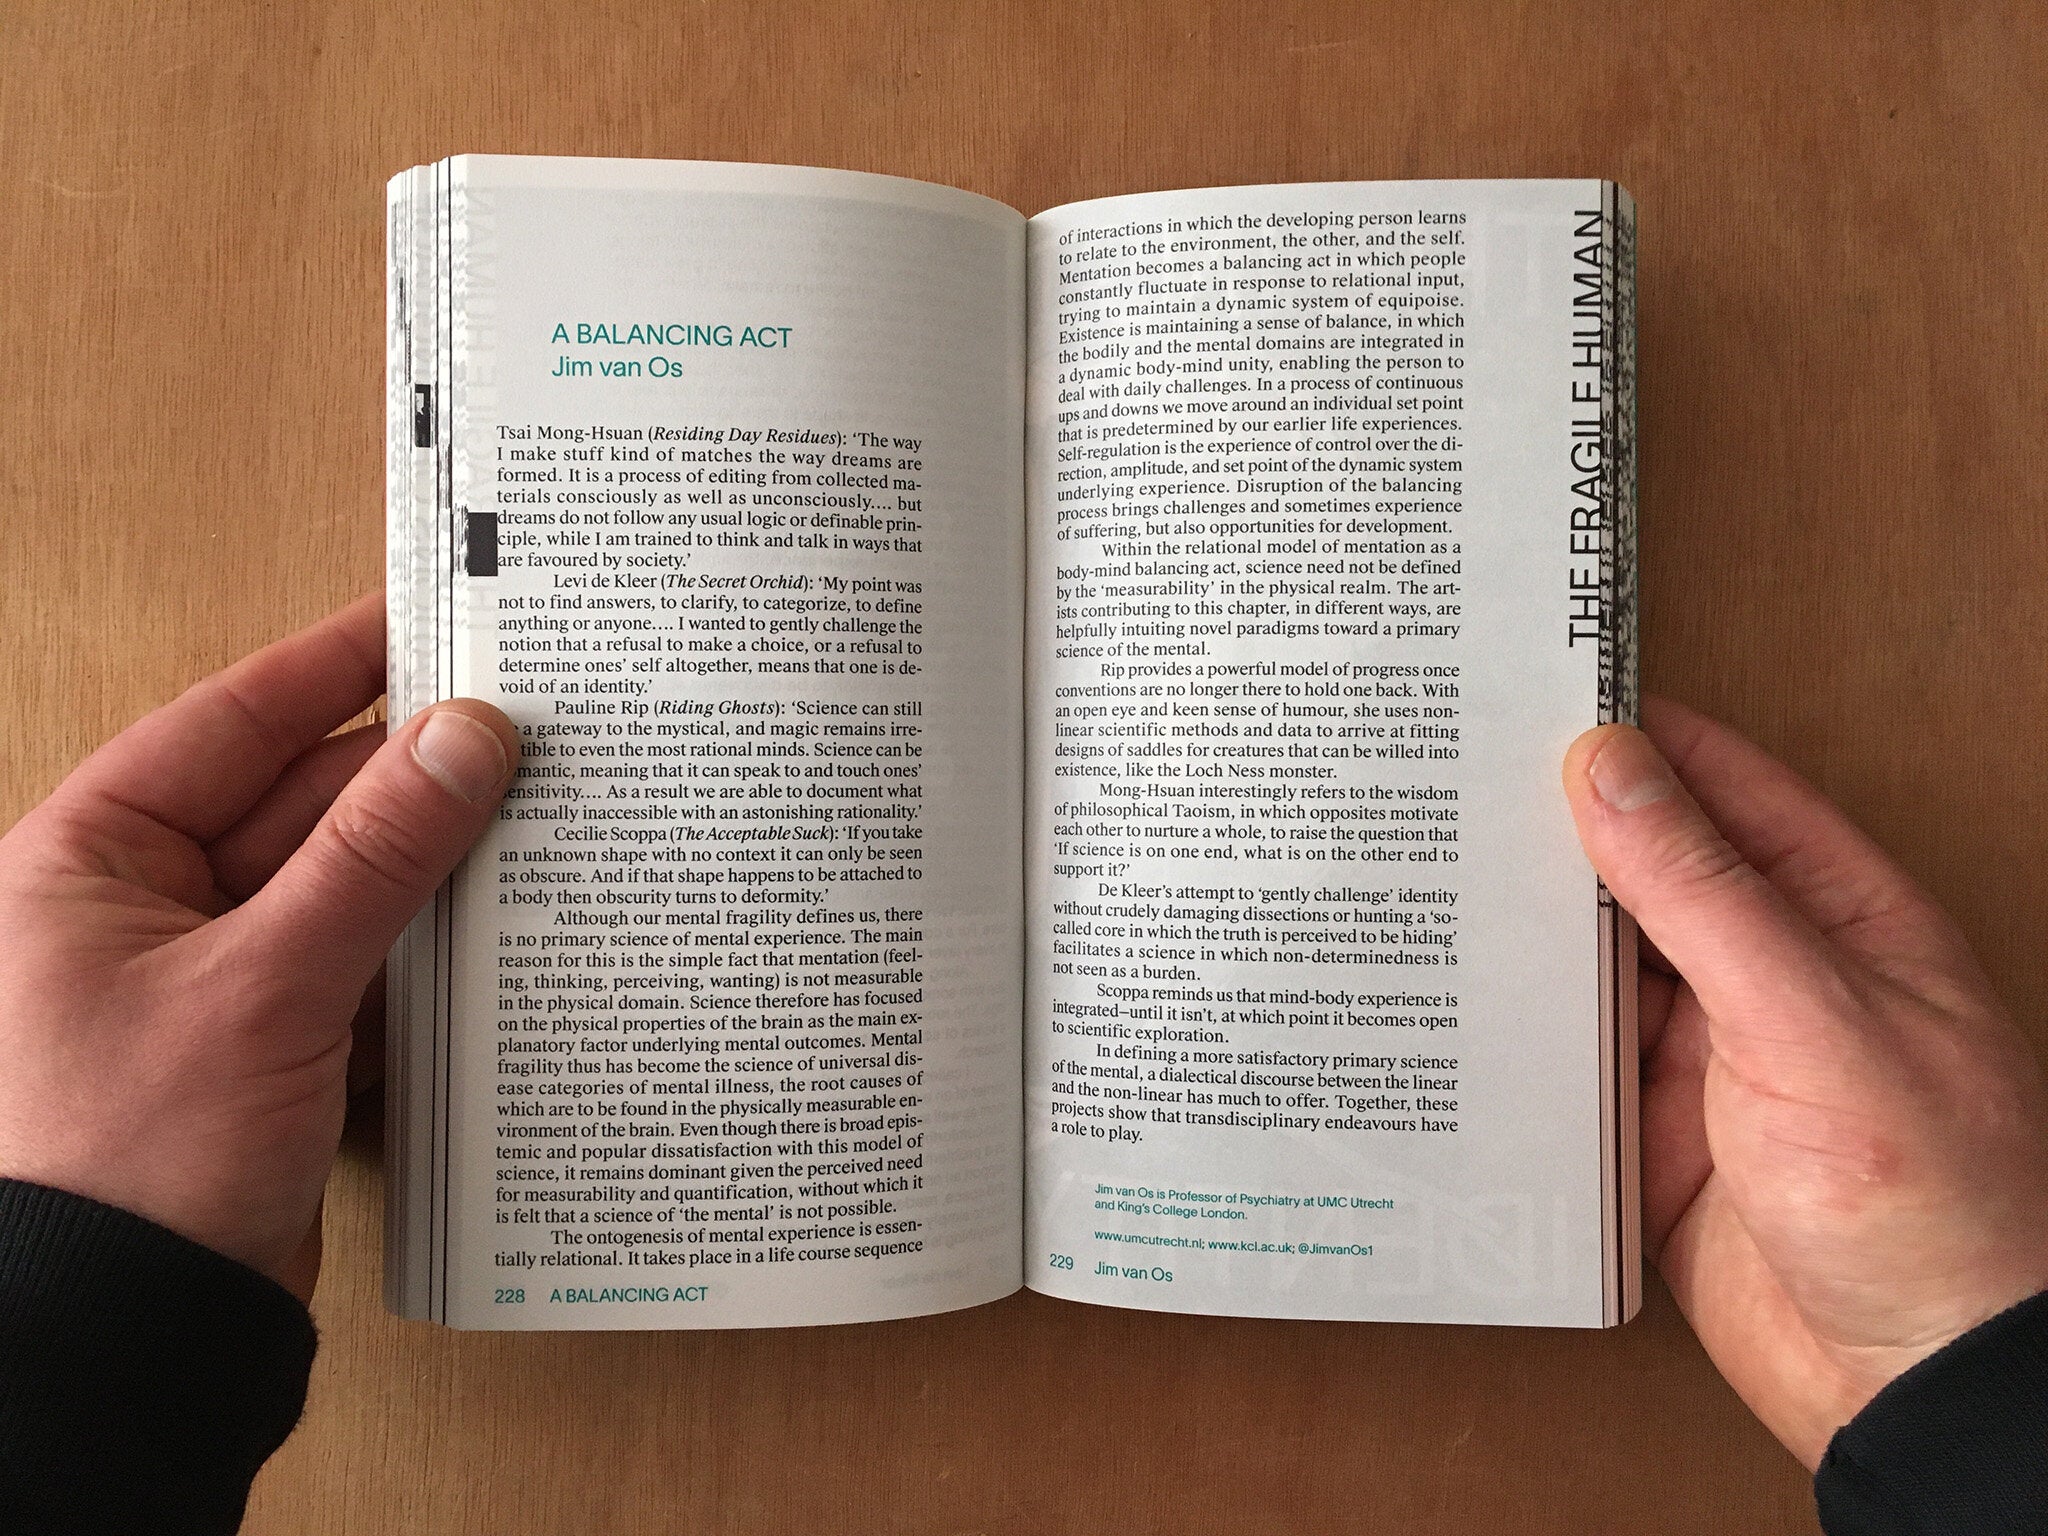 IN/SEARCH RE/SEARCH: IMAGINING SCENARIOS THROUGH ART AND DESIGN edited by Gabrielle Kennedy